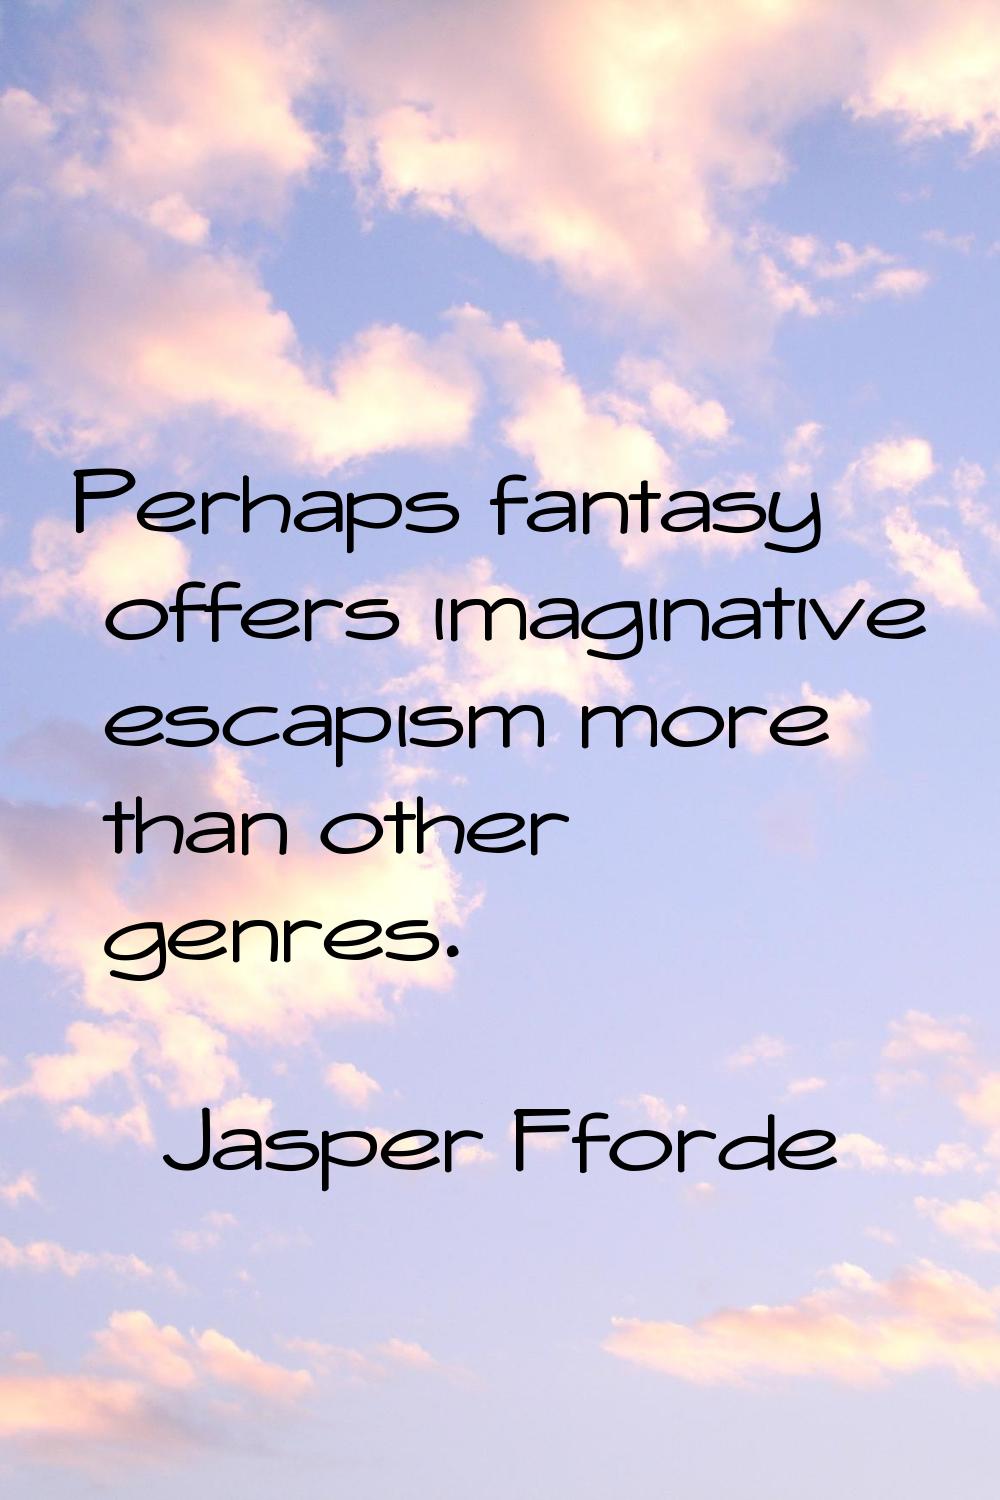 Perhaps fantasy offers imaginative escapism more than other genres.